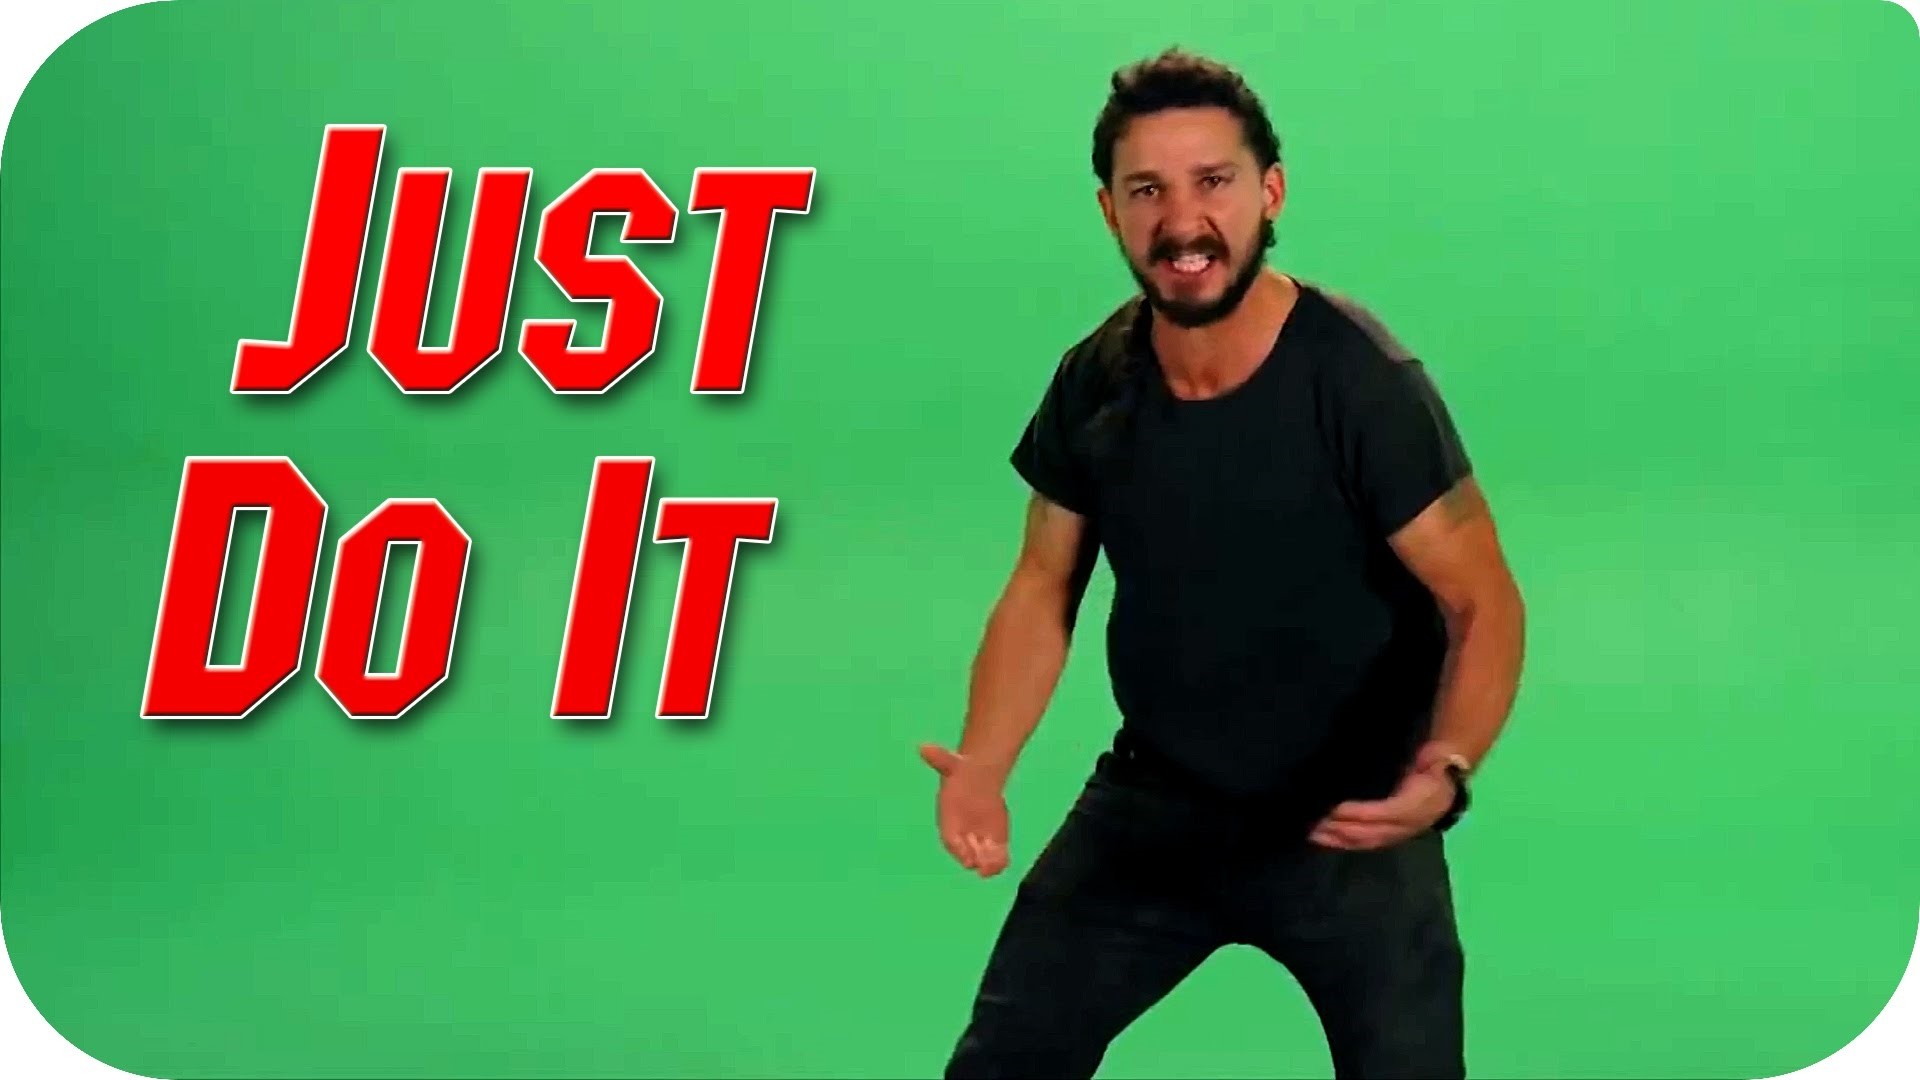 Just do it meme flat,10001000,075,f best images collections hd